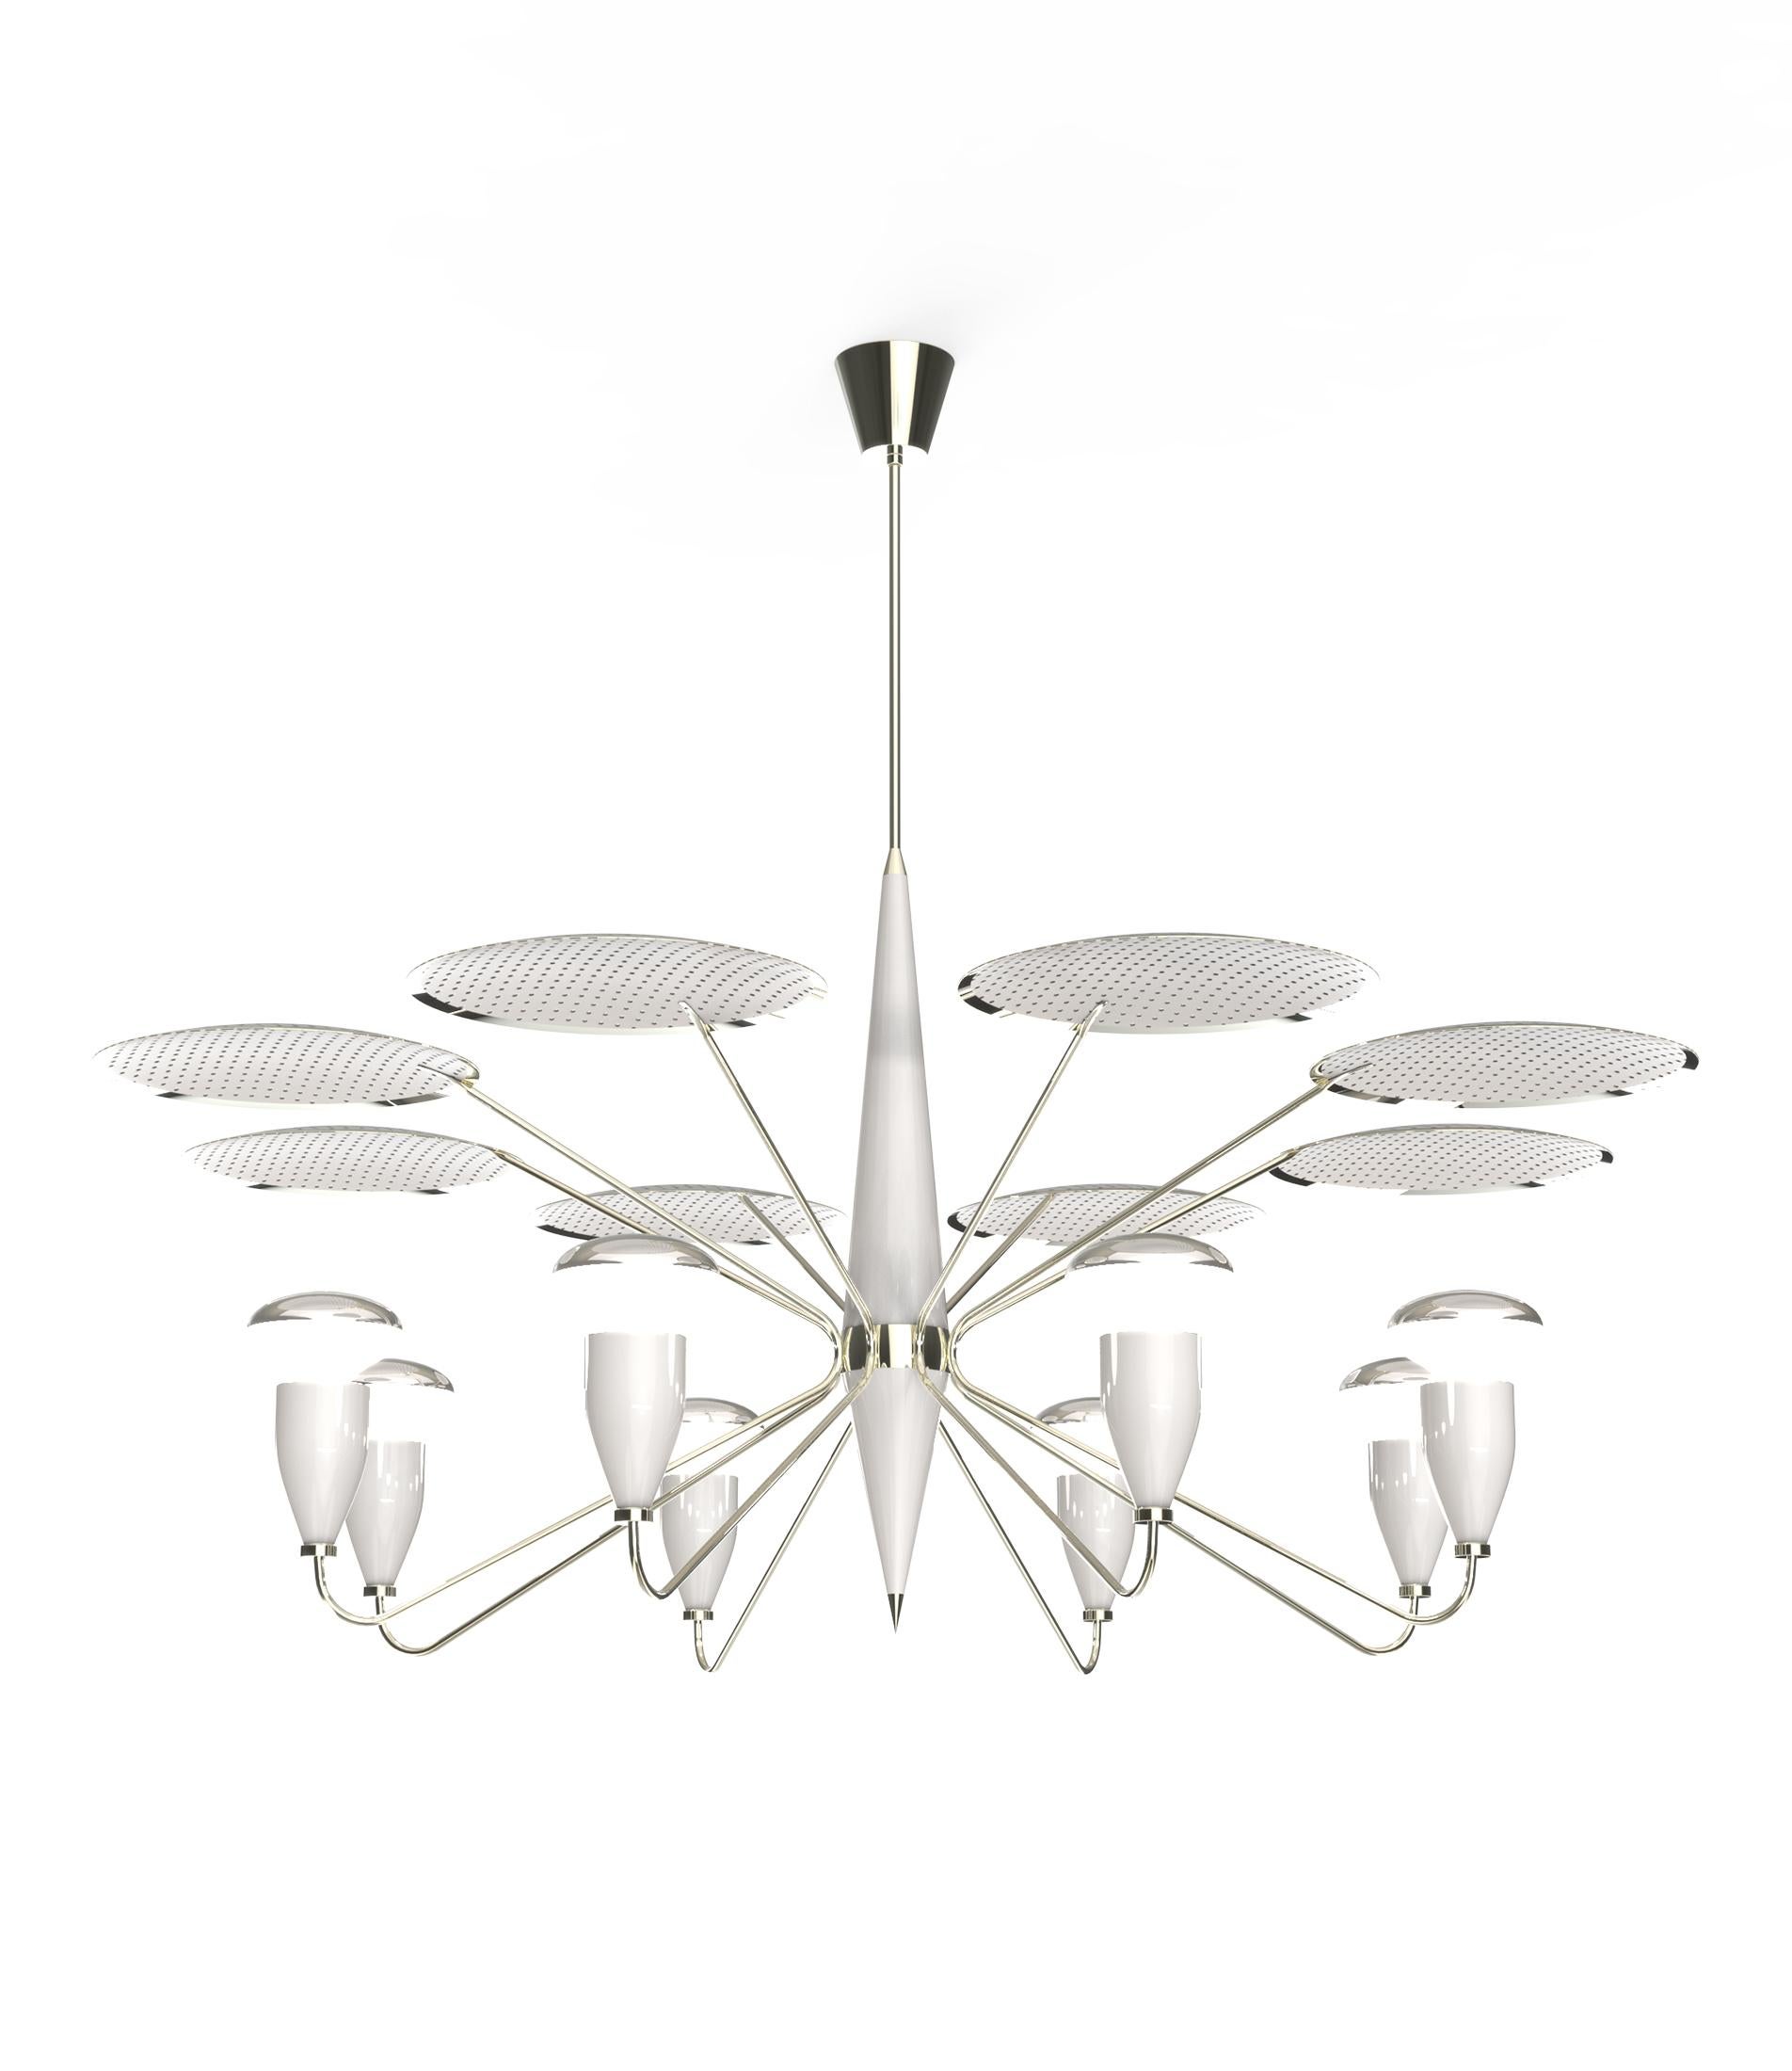 Peggy modern chandelier has a 1960s feel that won’t go unnoticed. With a structure handmade in brass and wood and with a top cover in perforated steel, this unique lamp has a nickel plated and matte white finish. The dazzling lighting design lamp